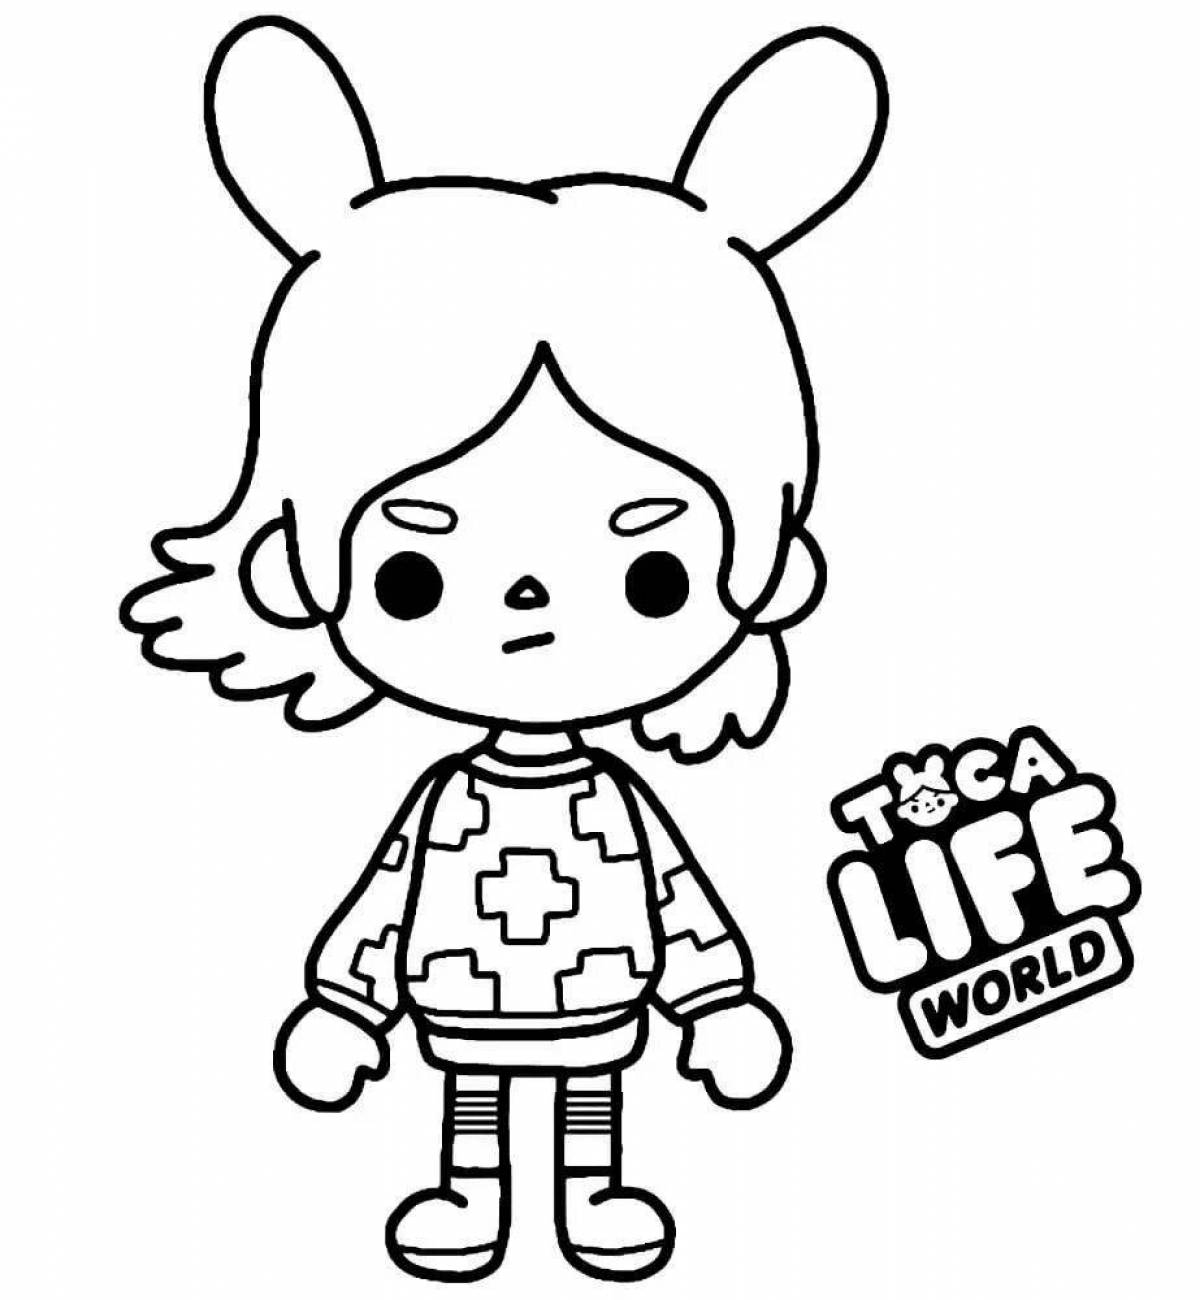 Toka fancy backpack coloring page